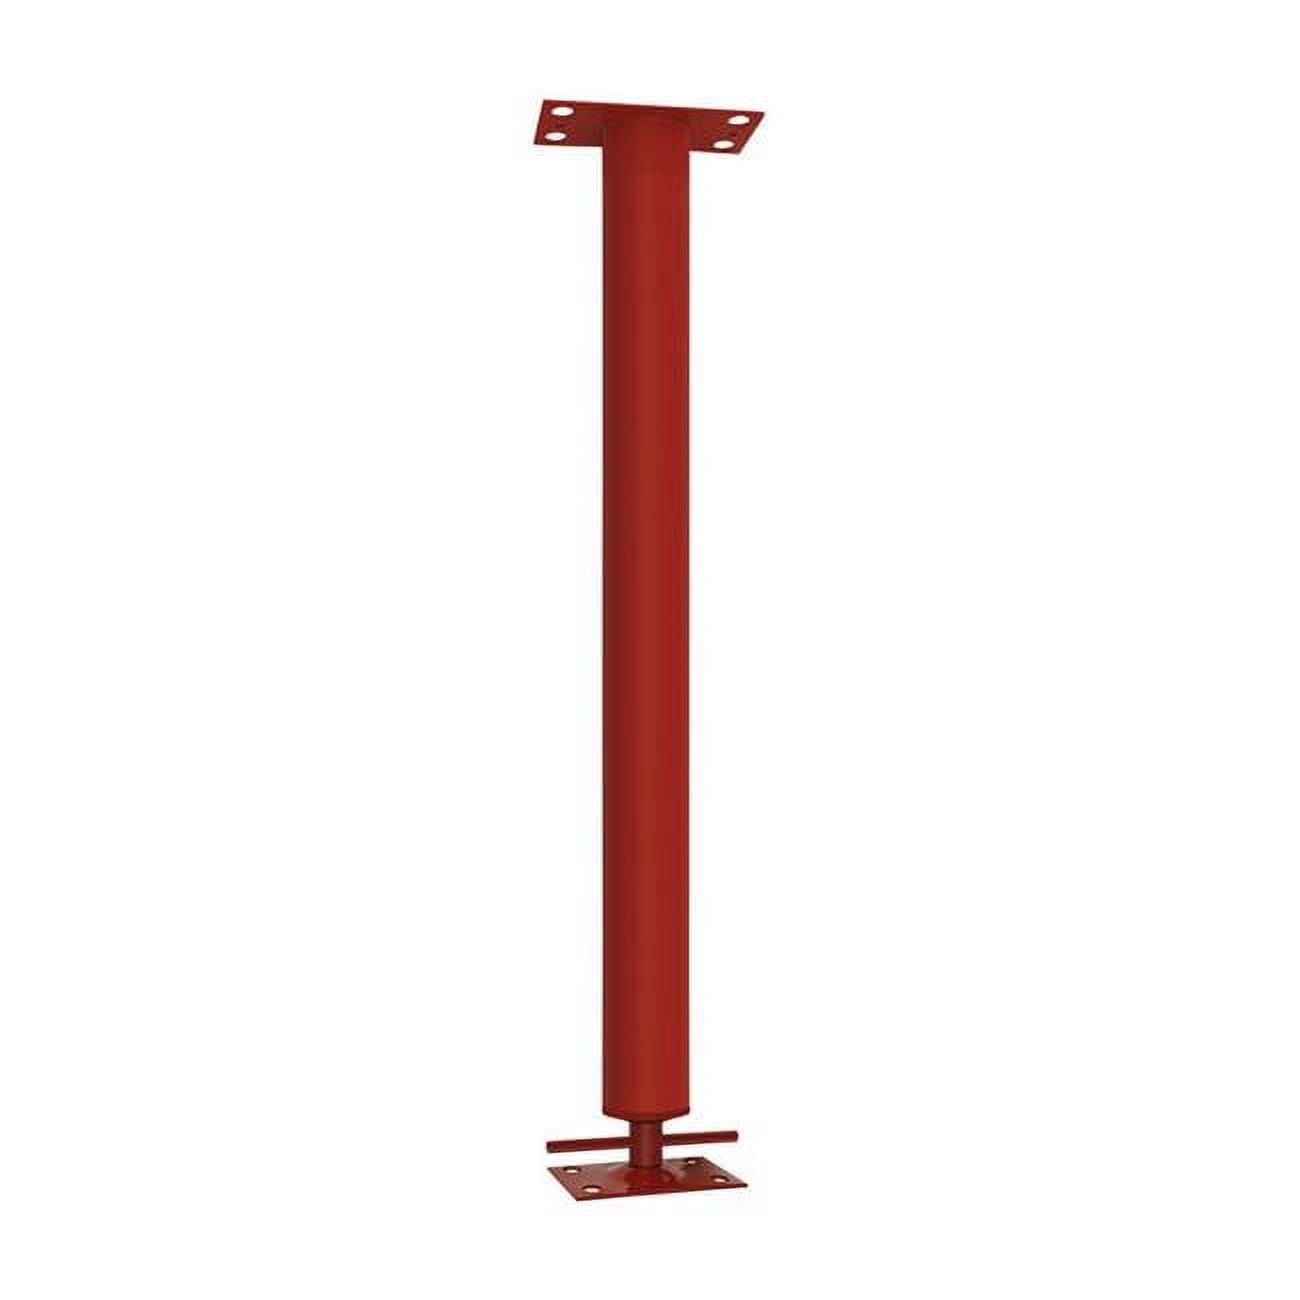 5007300 3 In. Dia. X 32 In. Adjustable Building Support Column - 23700 Lbs